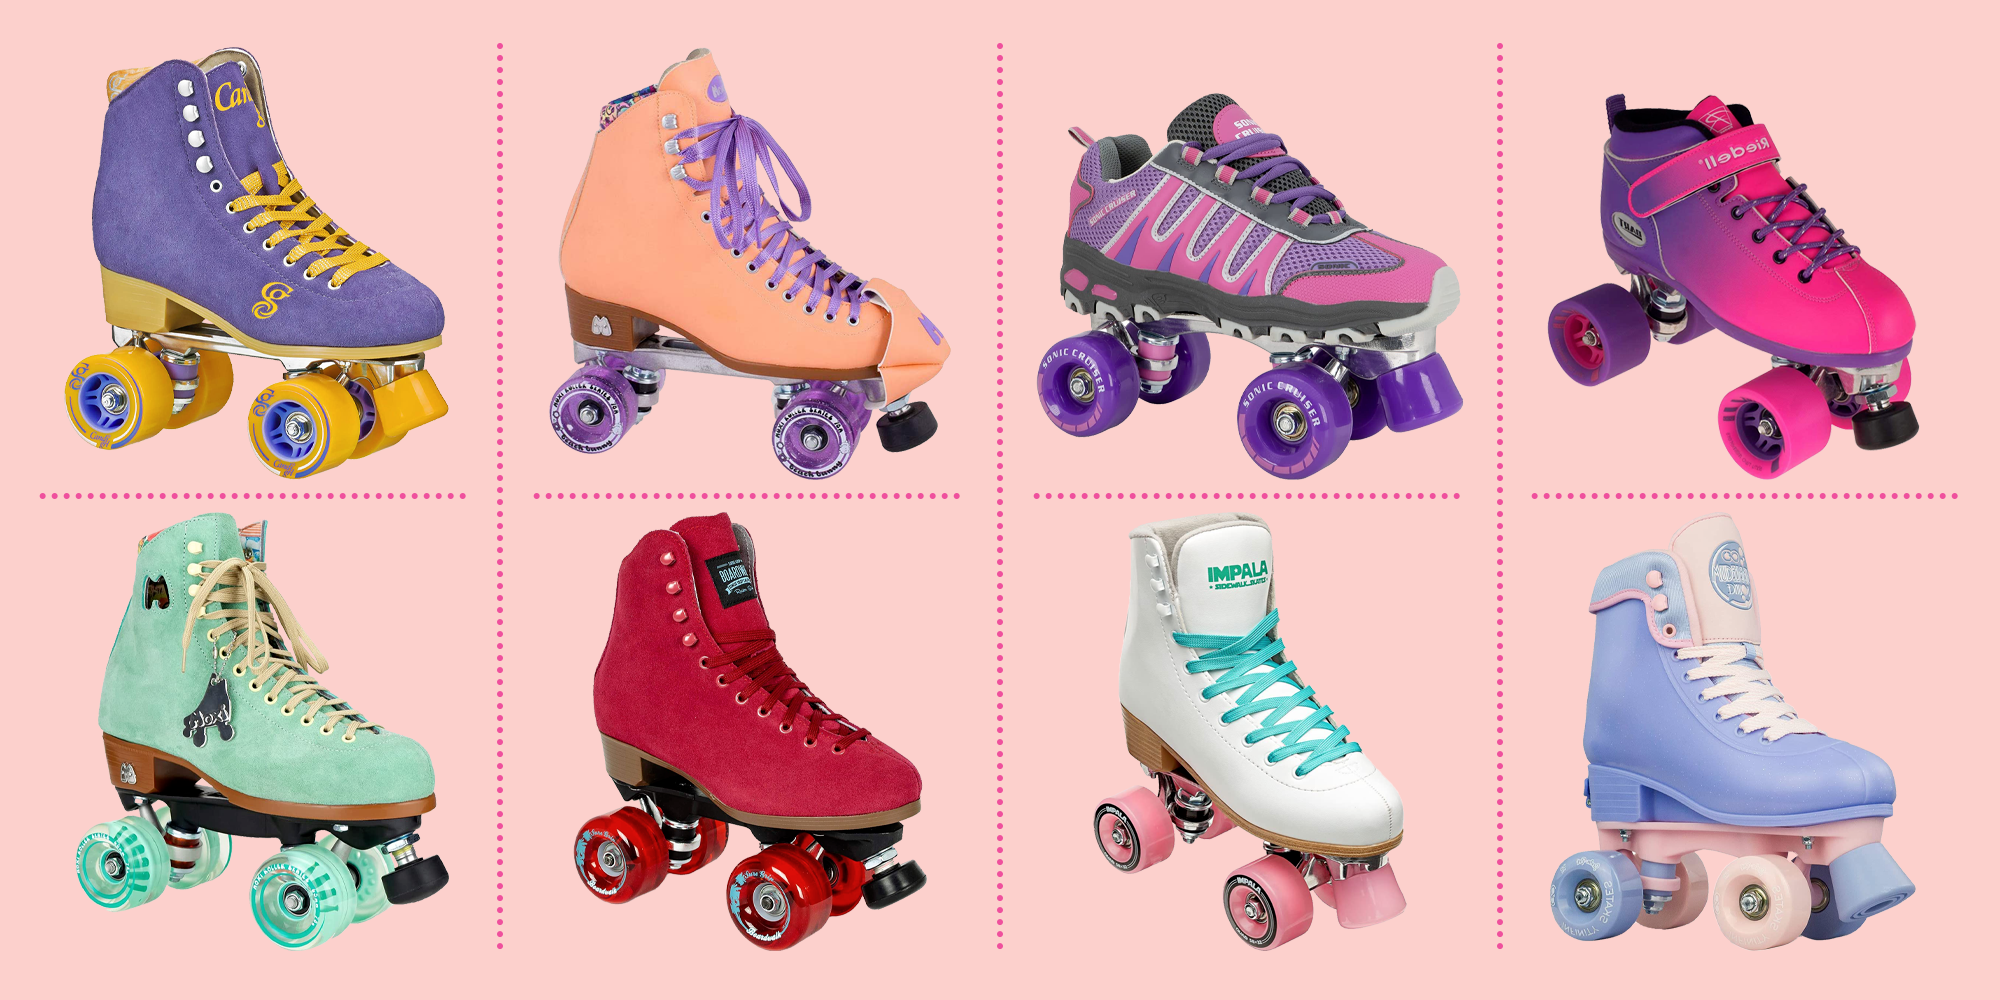 WOMEN LADY GIRL YOUTH ROLLER SKATES QUAD FOUR WHEELS HIGH TOP BLUE COLOR 